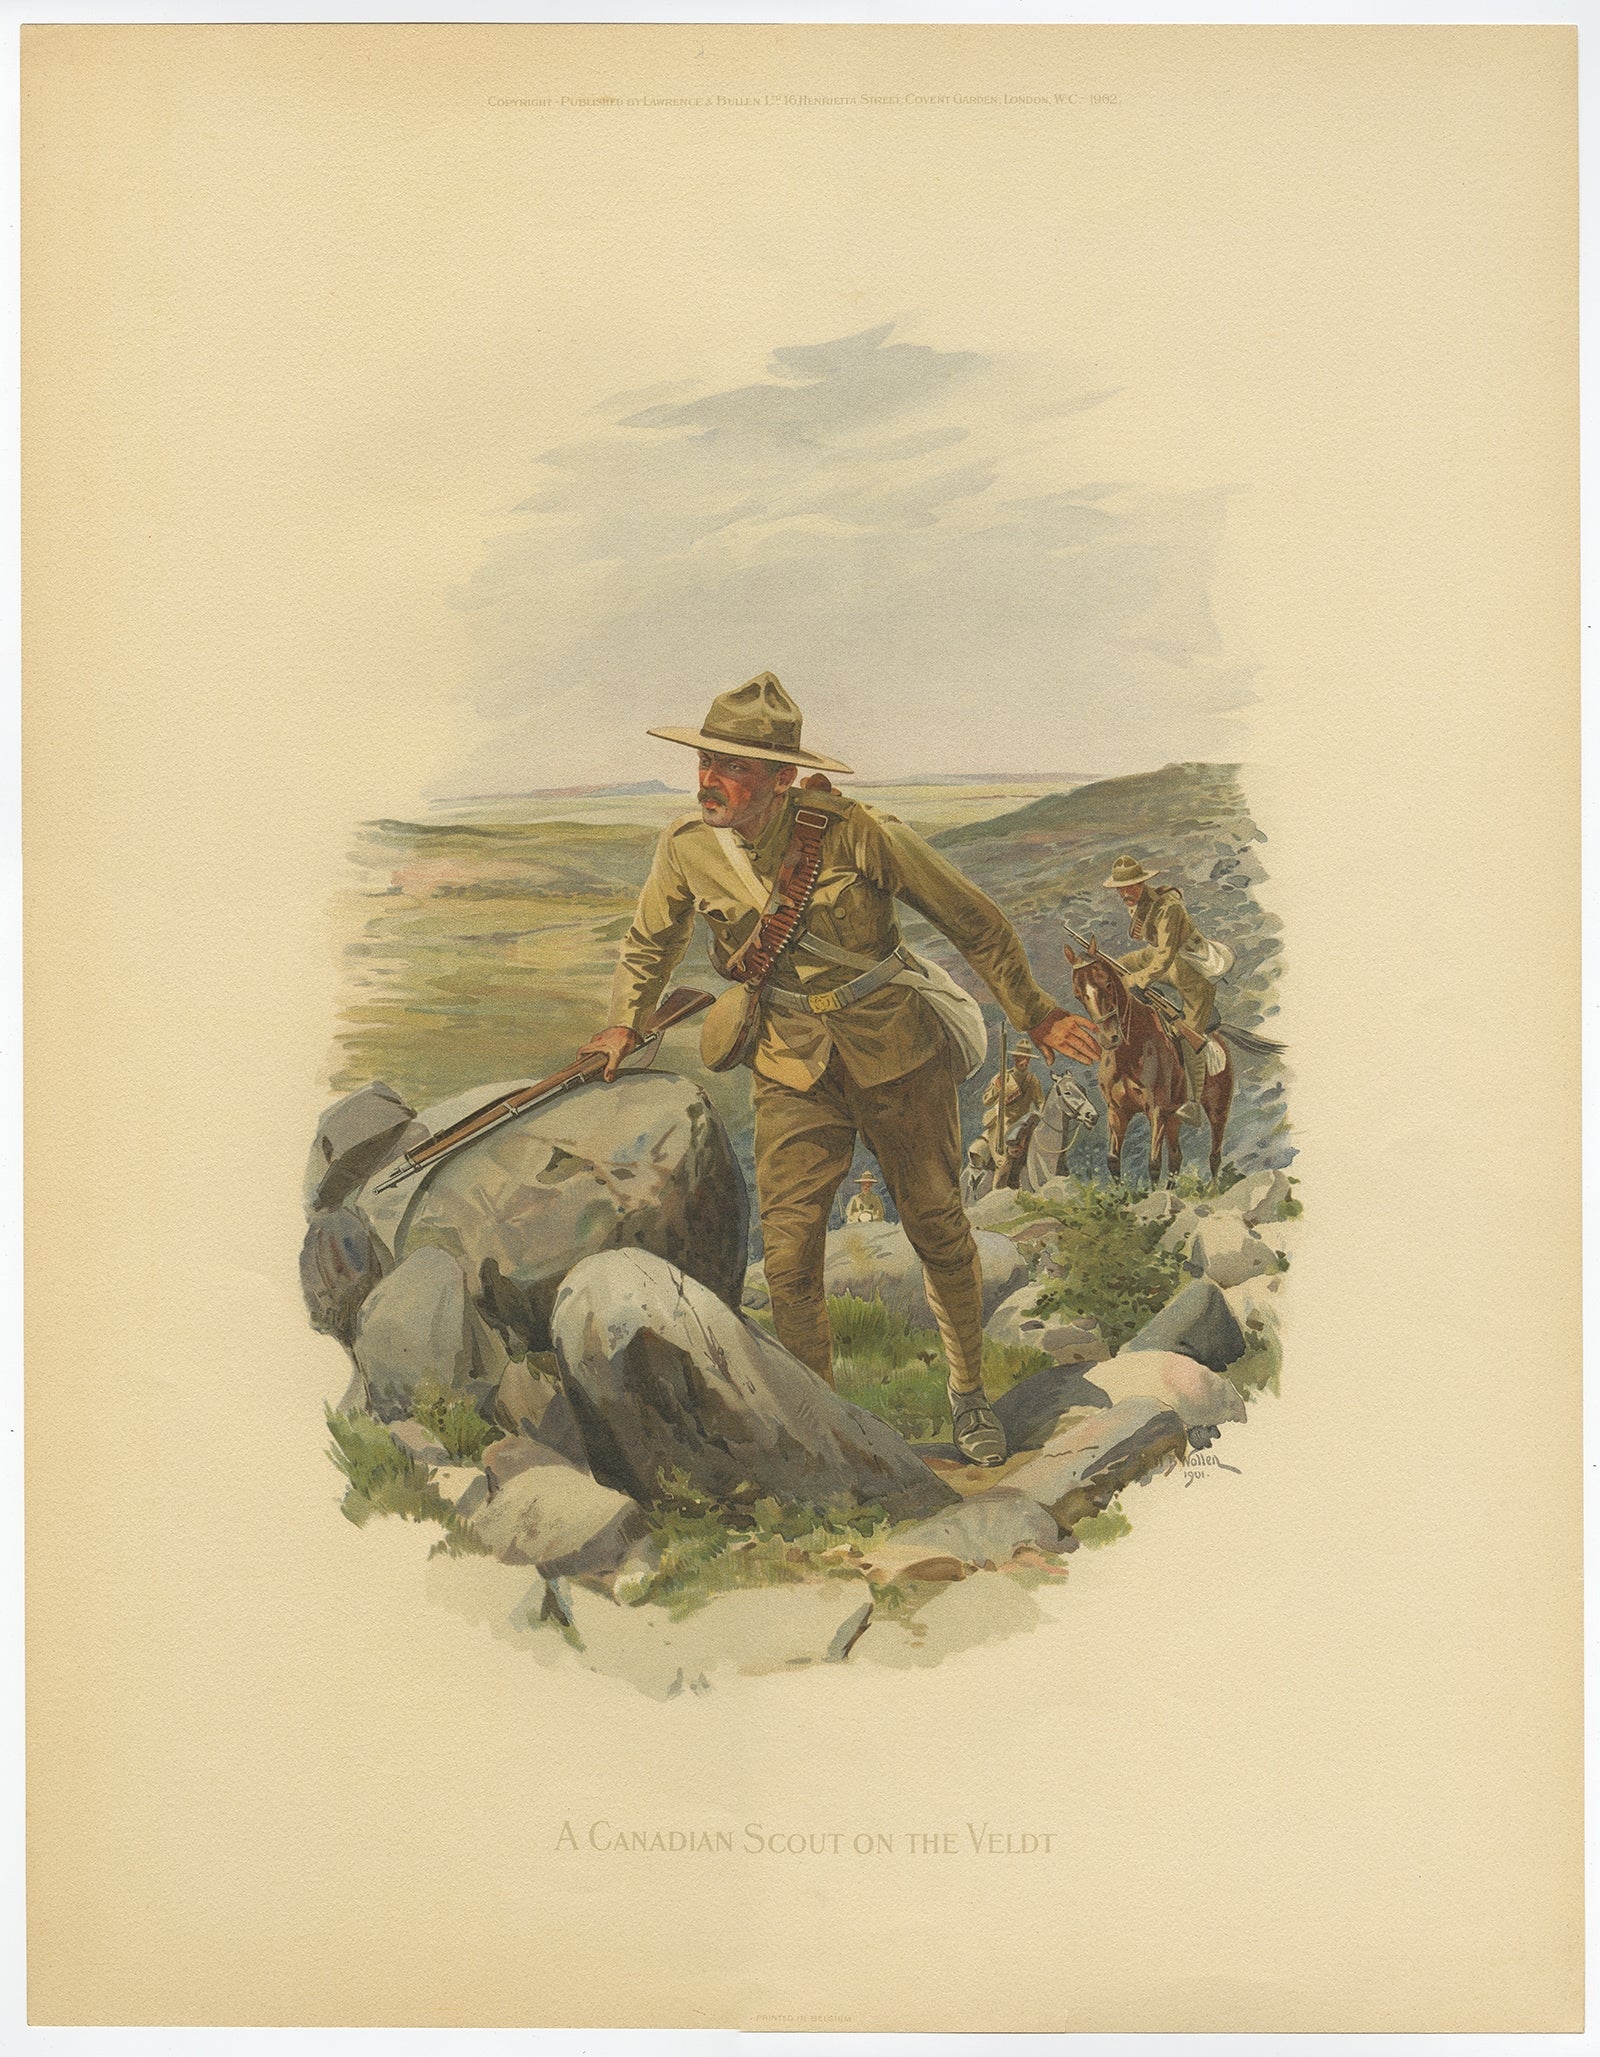 Antique print, titled: 'A Canadia Scout on the Veldt.' 

A Canadian military Scout on the Veldt in the South African Boer war. Published by Lawrence & Bullen in London 1902. Printed in Belgium.

Artists and Engravers: Made by an anonymous